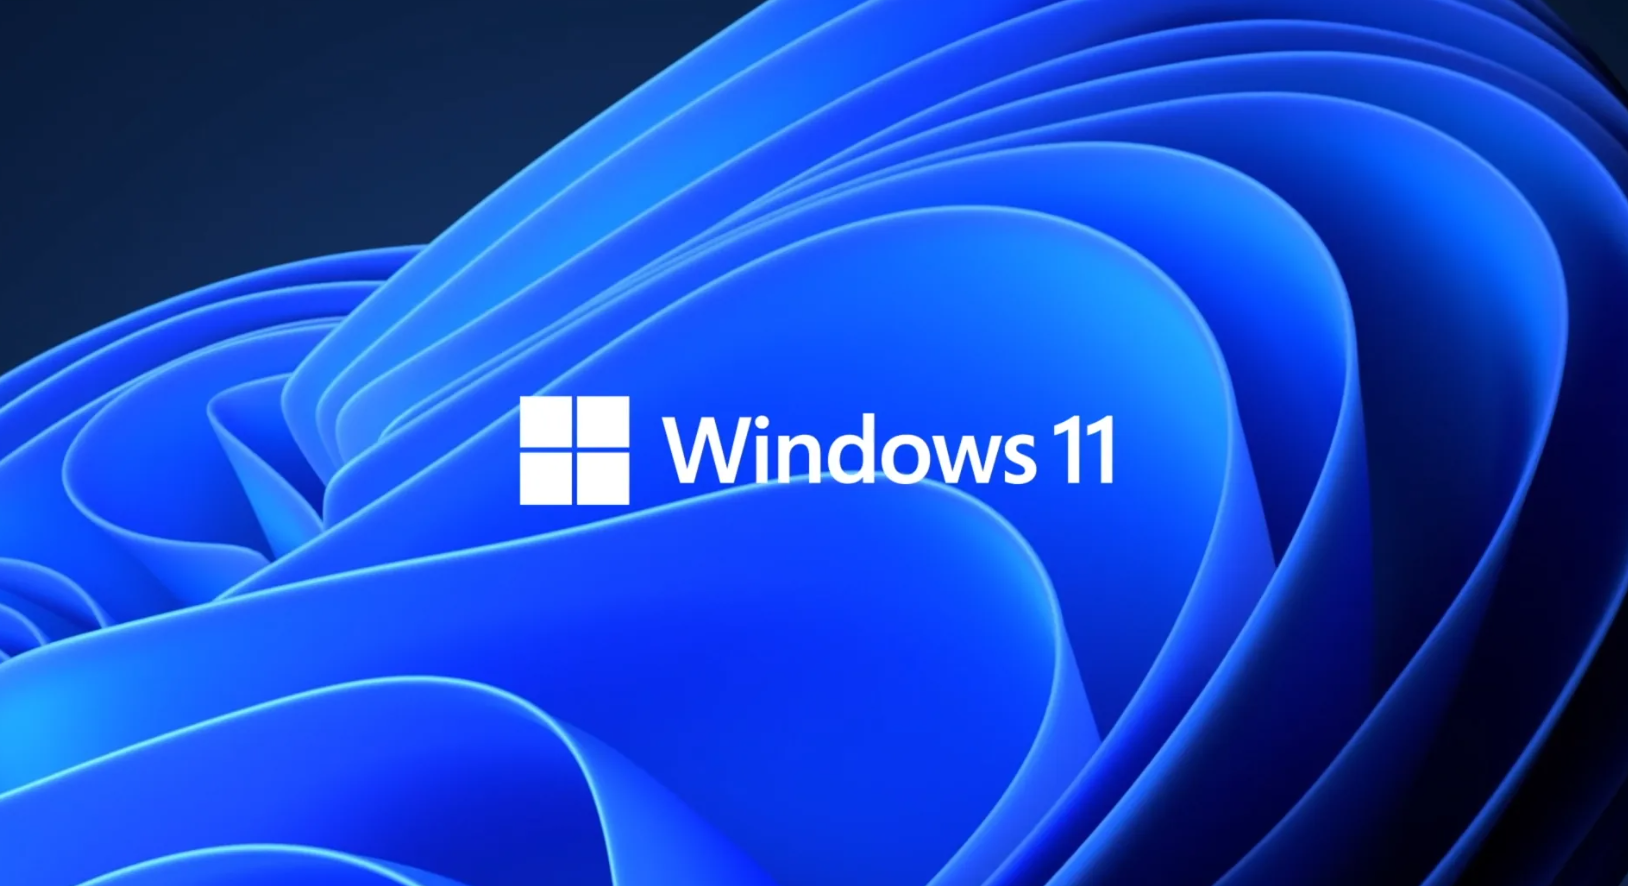 How to download and install Windows 11? 